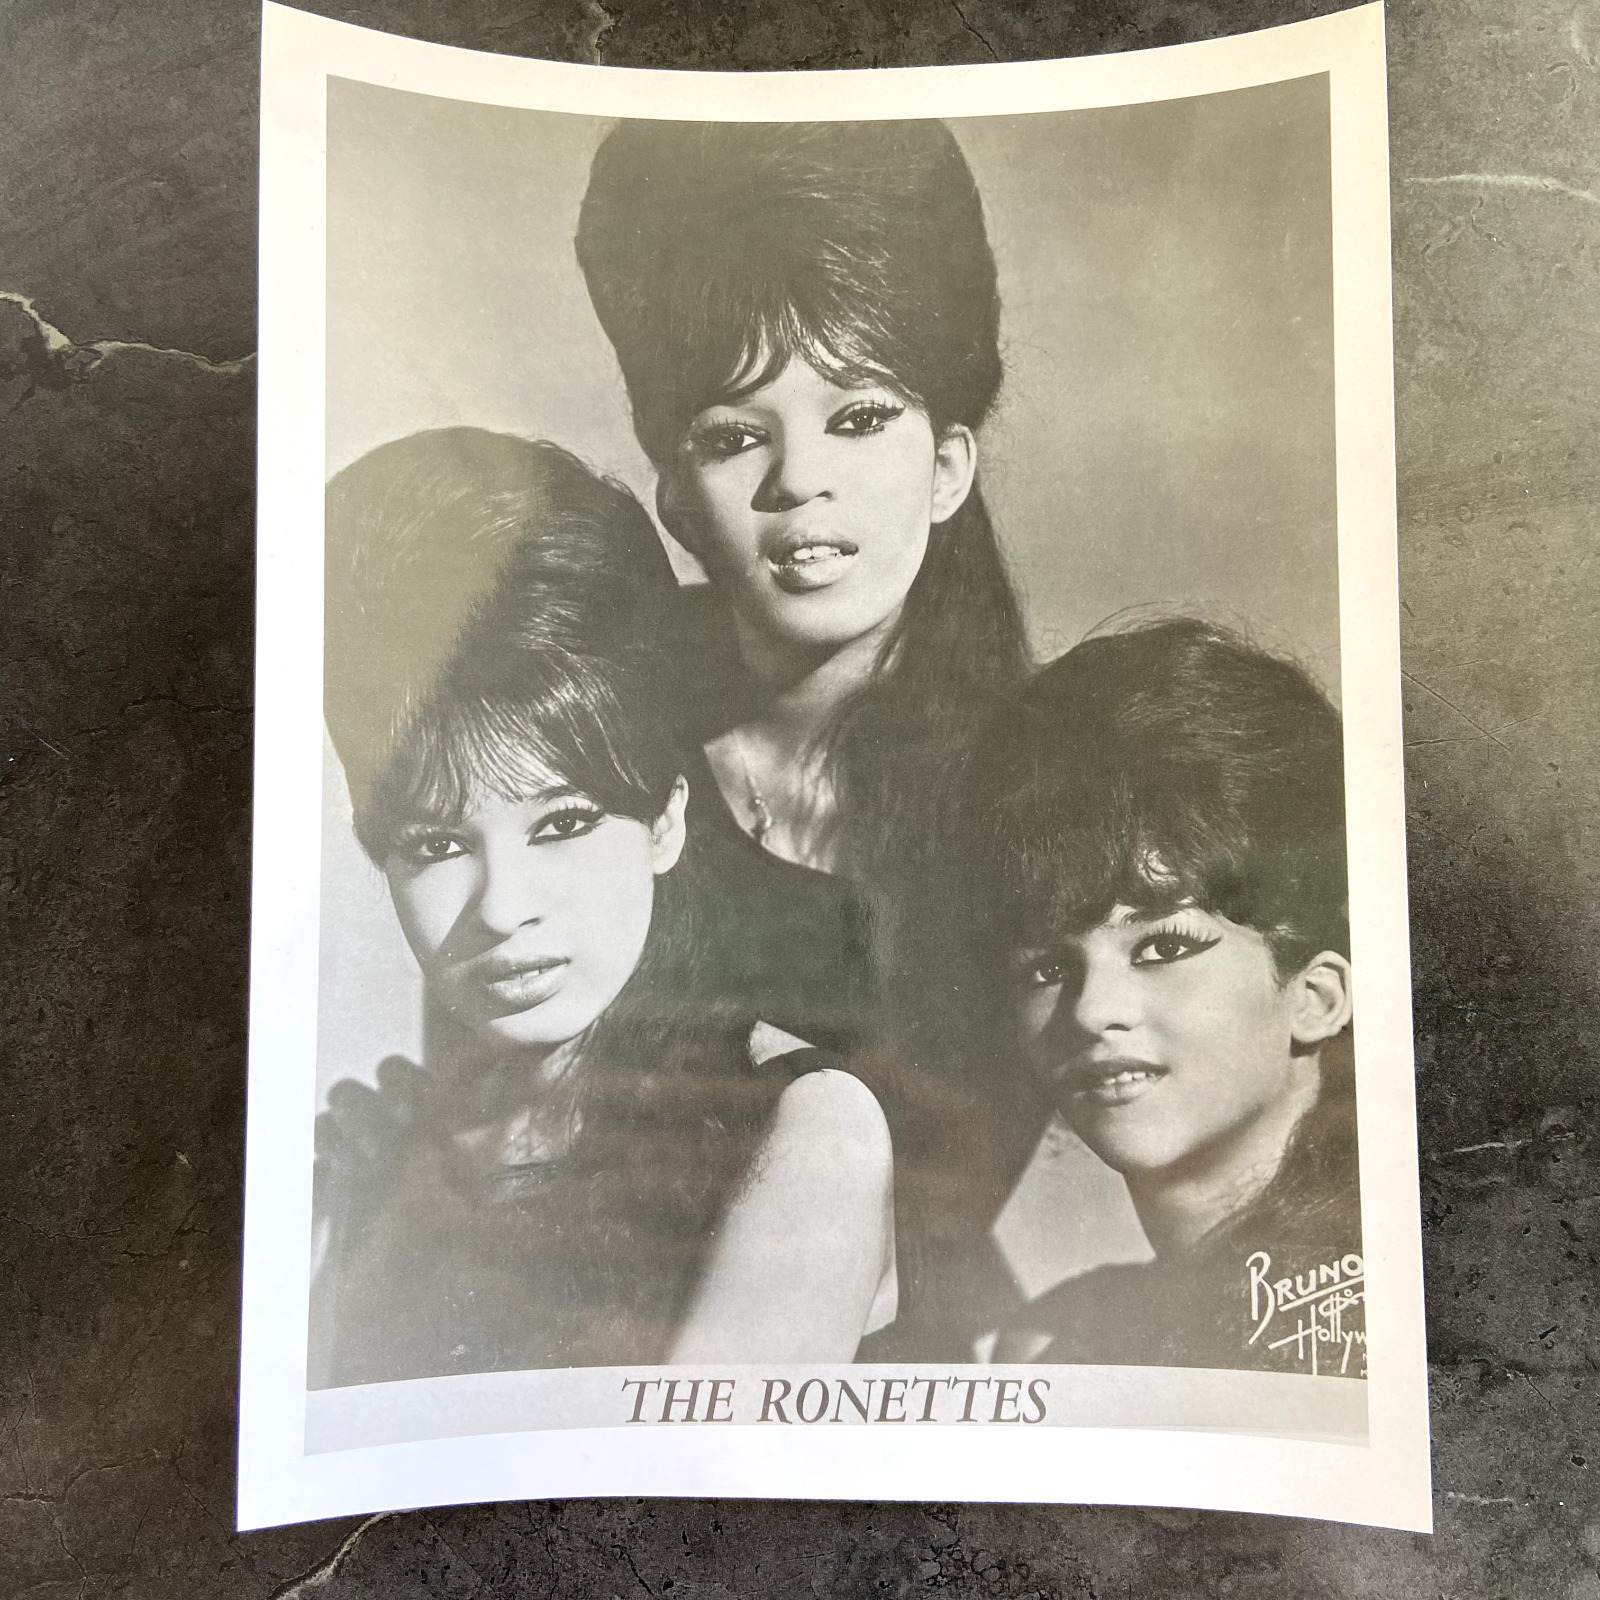 The Ronettes Ronnie Spector 8x10 Photo B&W Vintage (B24)